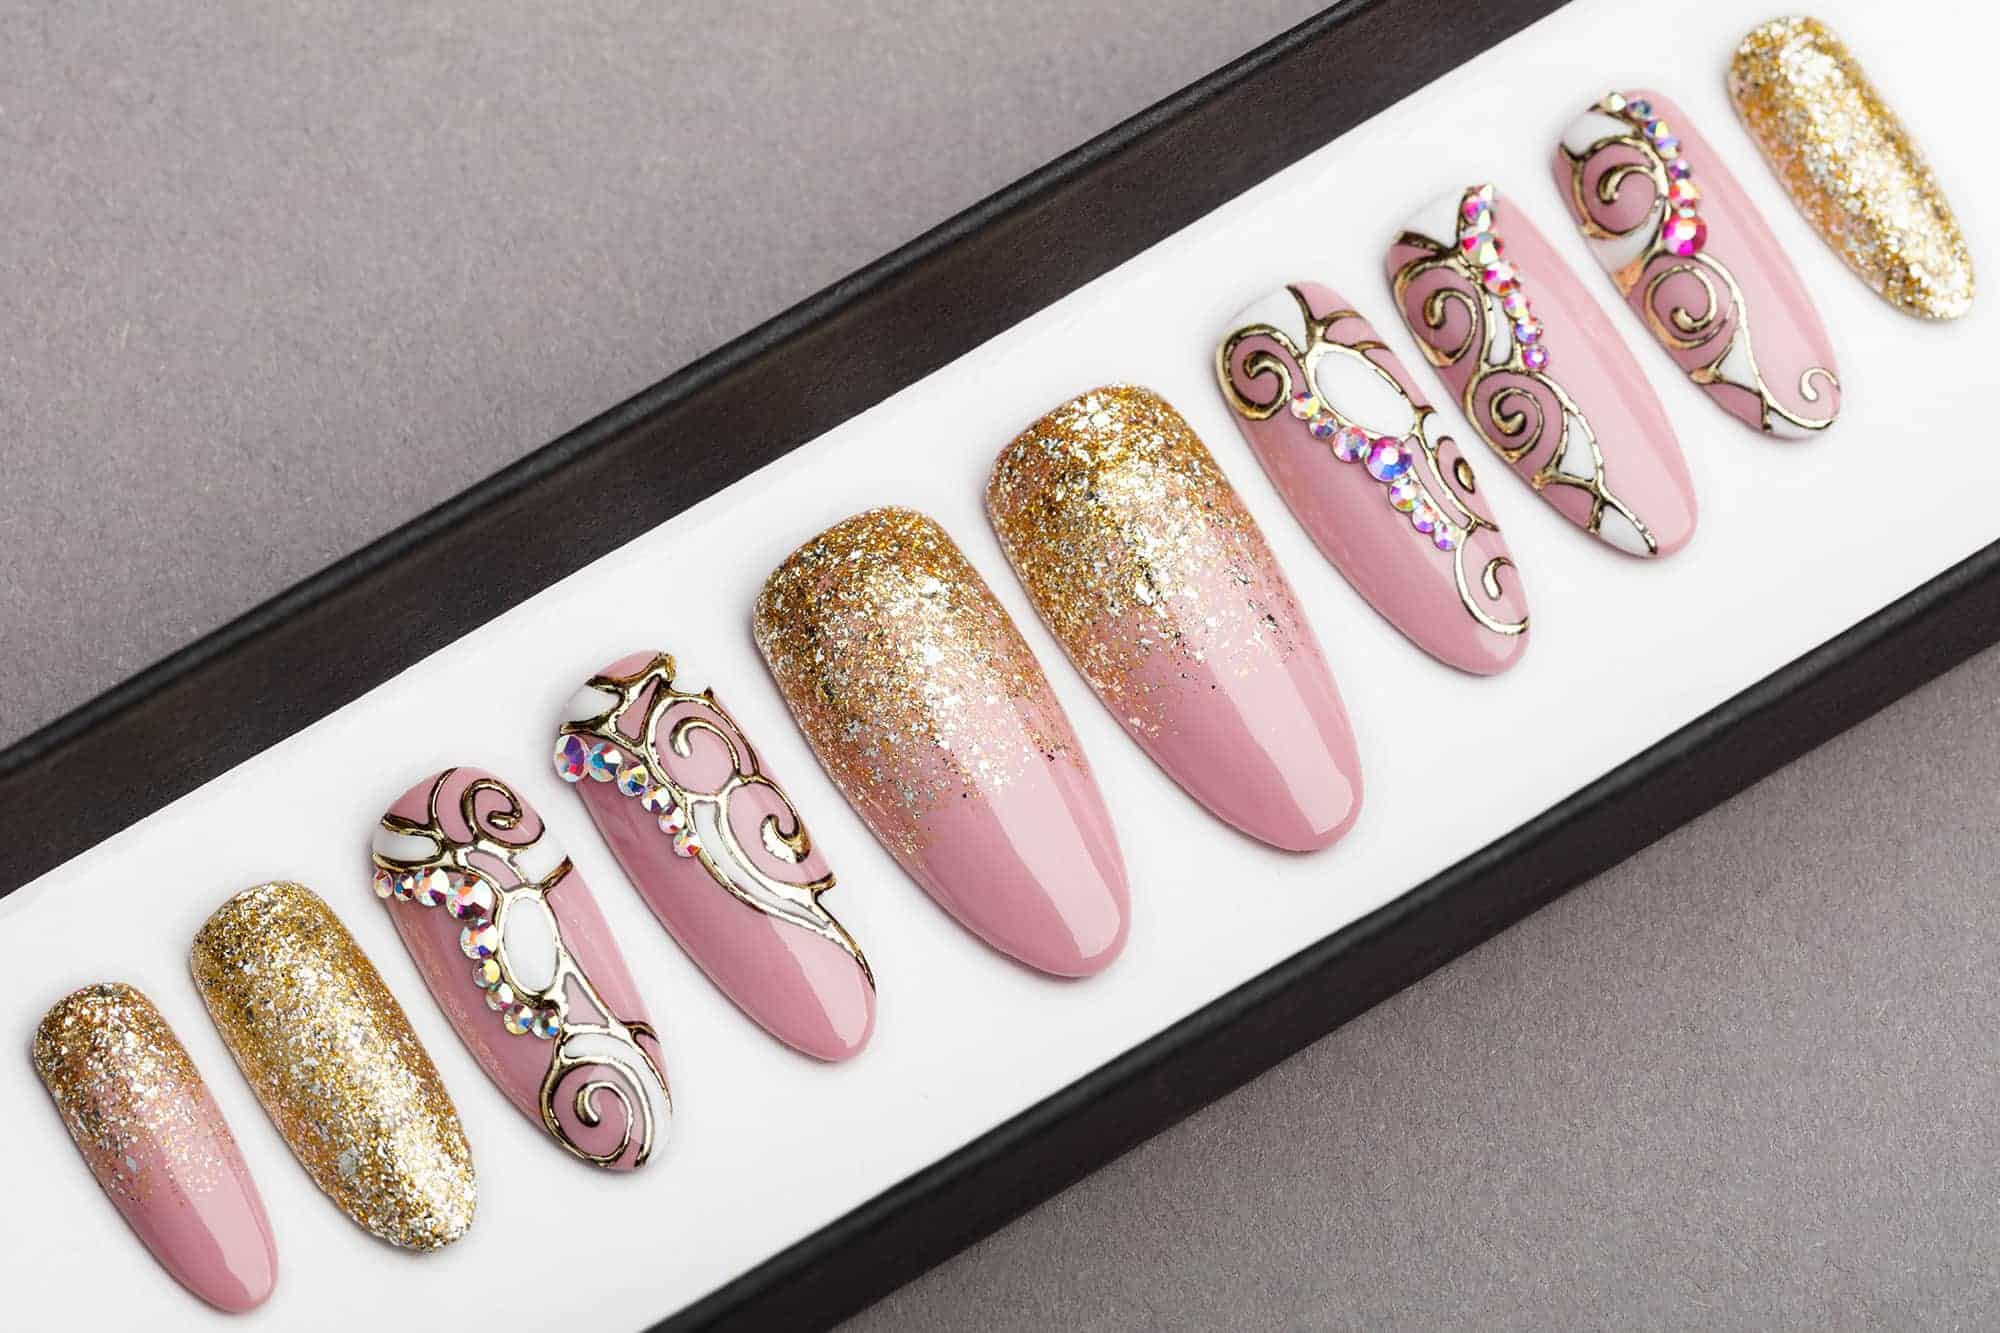 Pink and Gold Press on Nails with Swarovski | Fake Nails | False Nails | Golden tracery | Handpainted Nail Art | Glitters